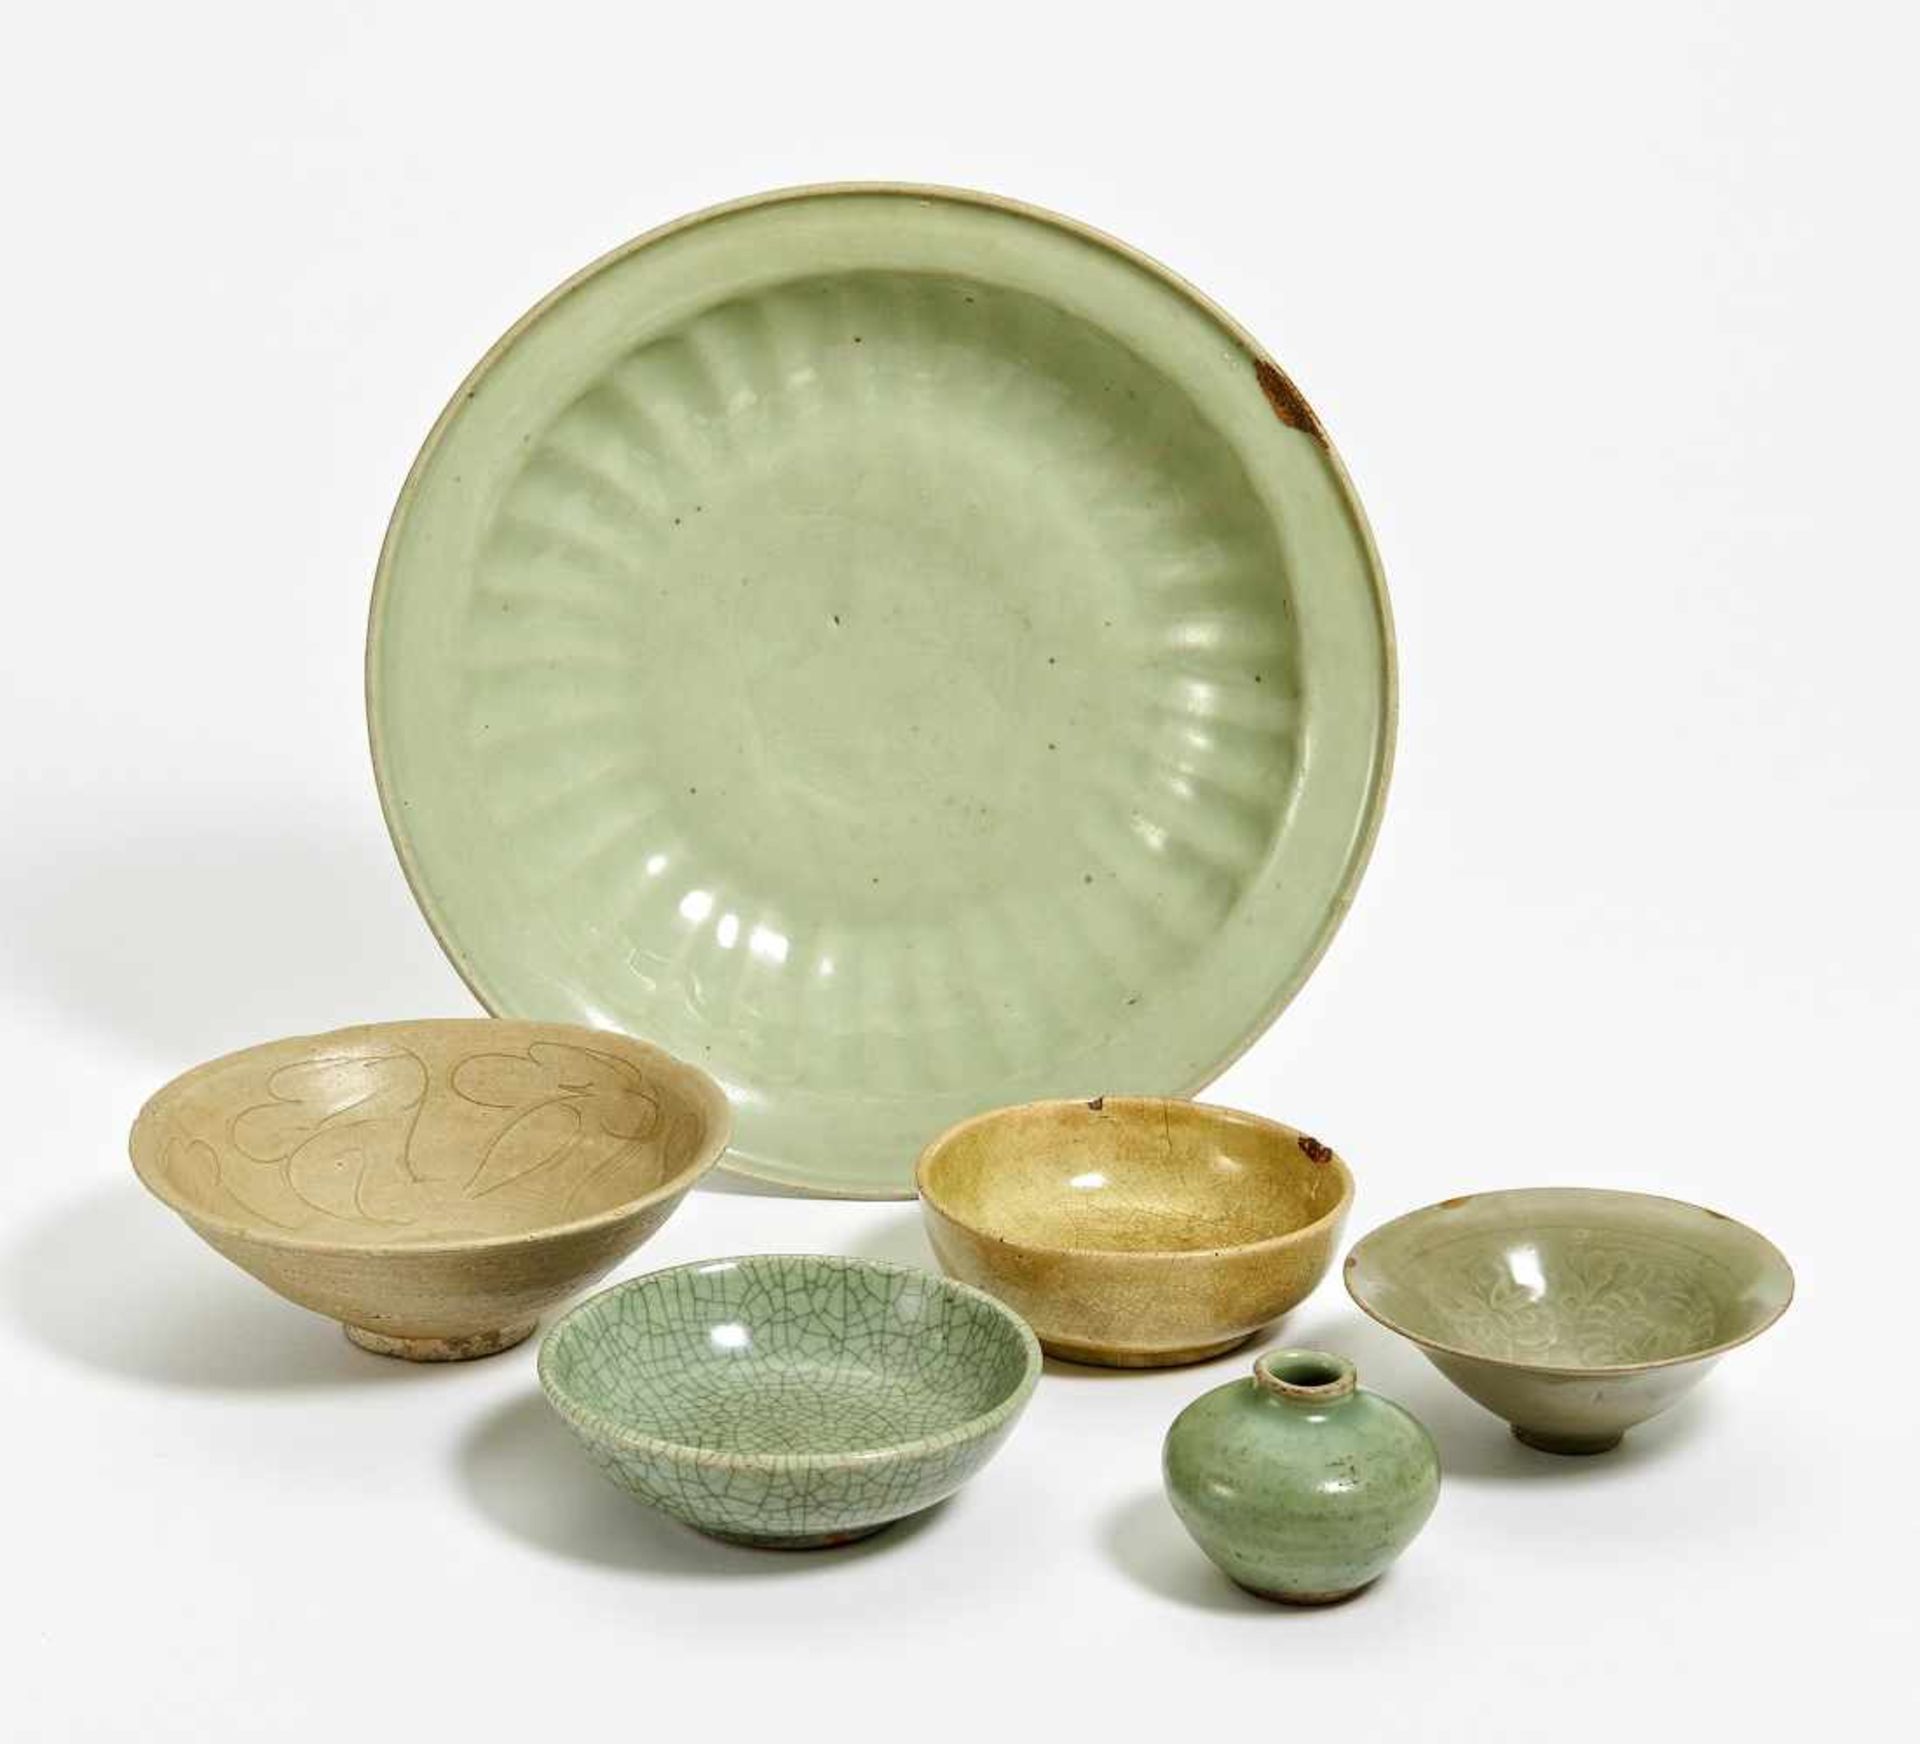 LARGE CELADON DISH WITH TWIN FISH AND FIVE OTHER PIECES. China/Korea. Stoneware, light green to